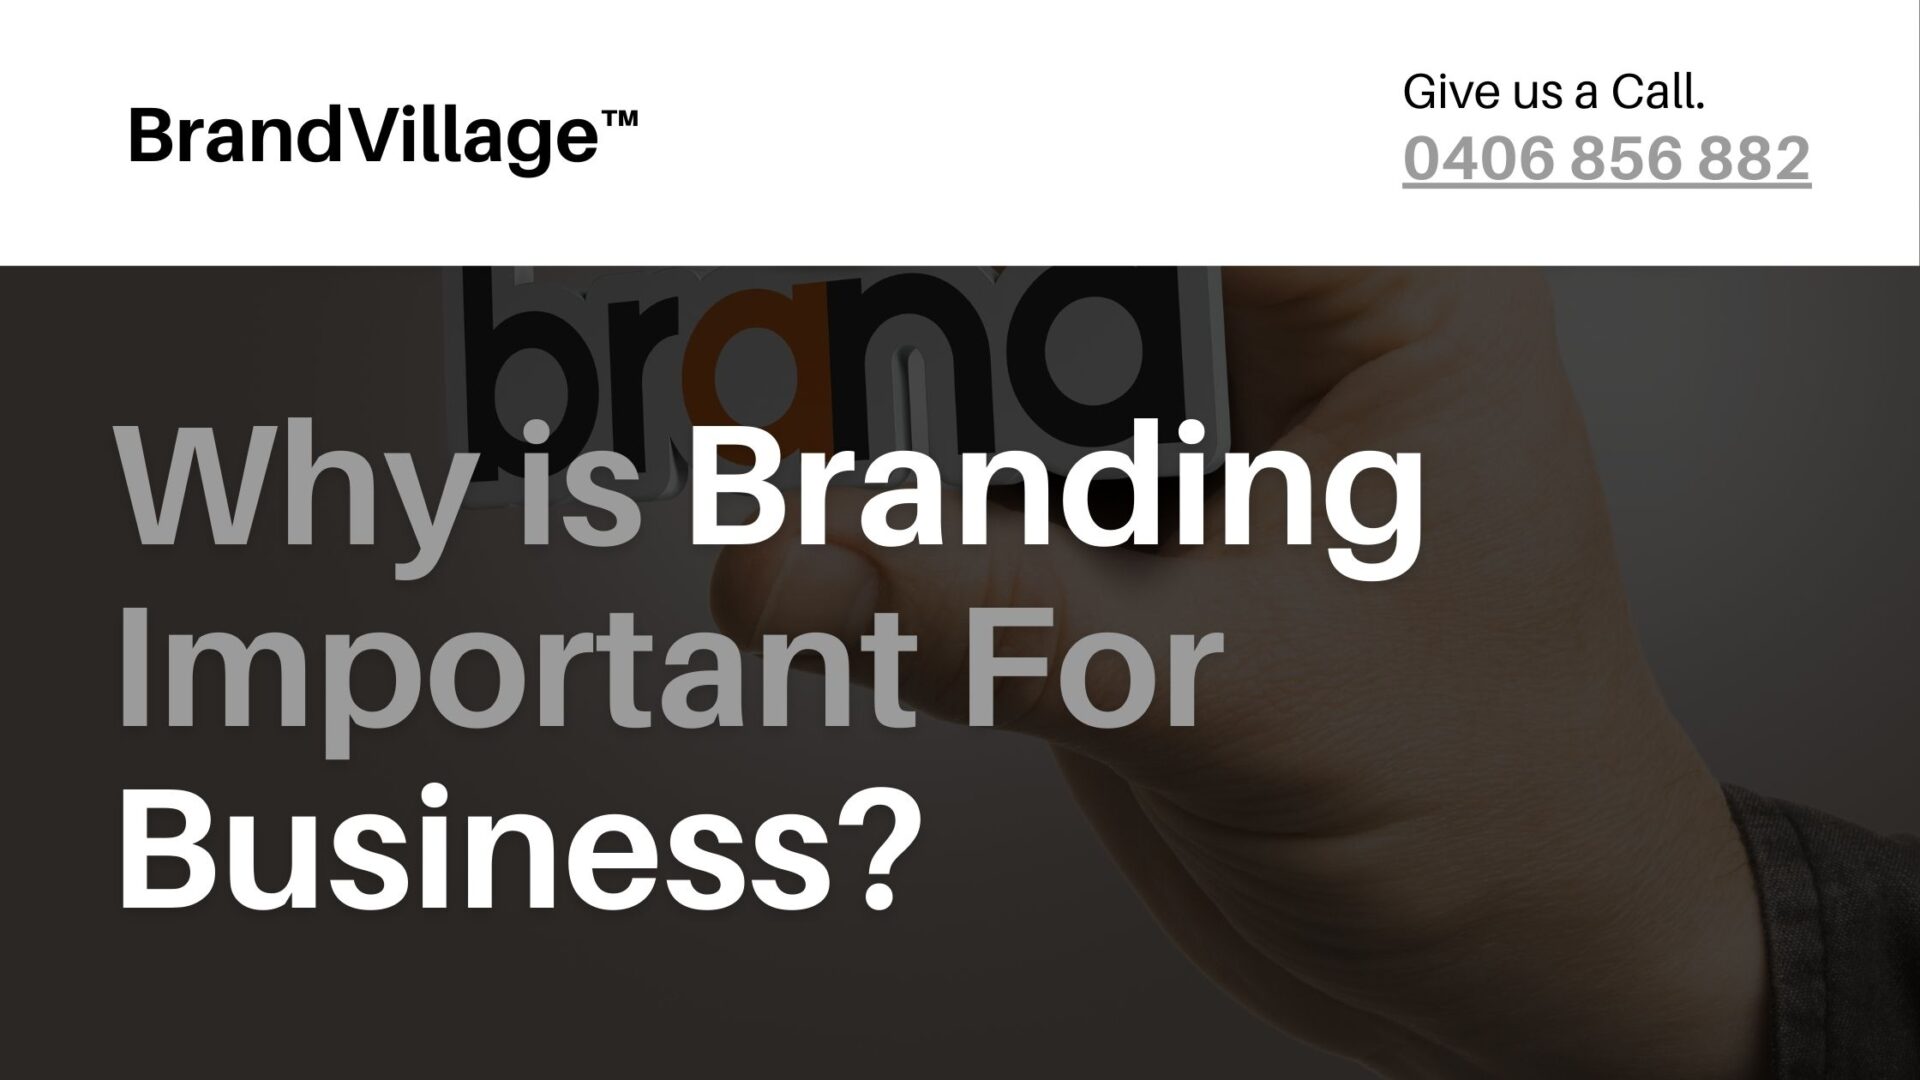 Why Is Branding Important For Business?